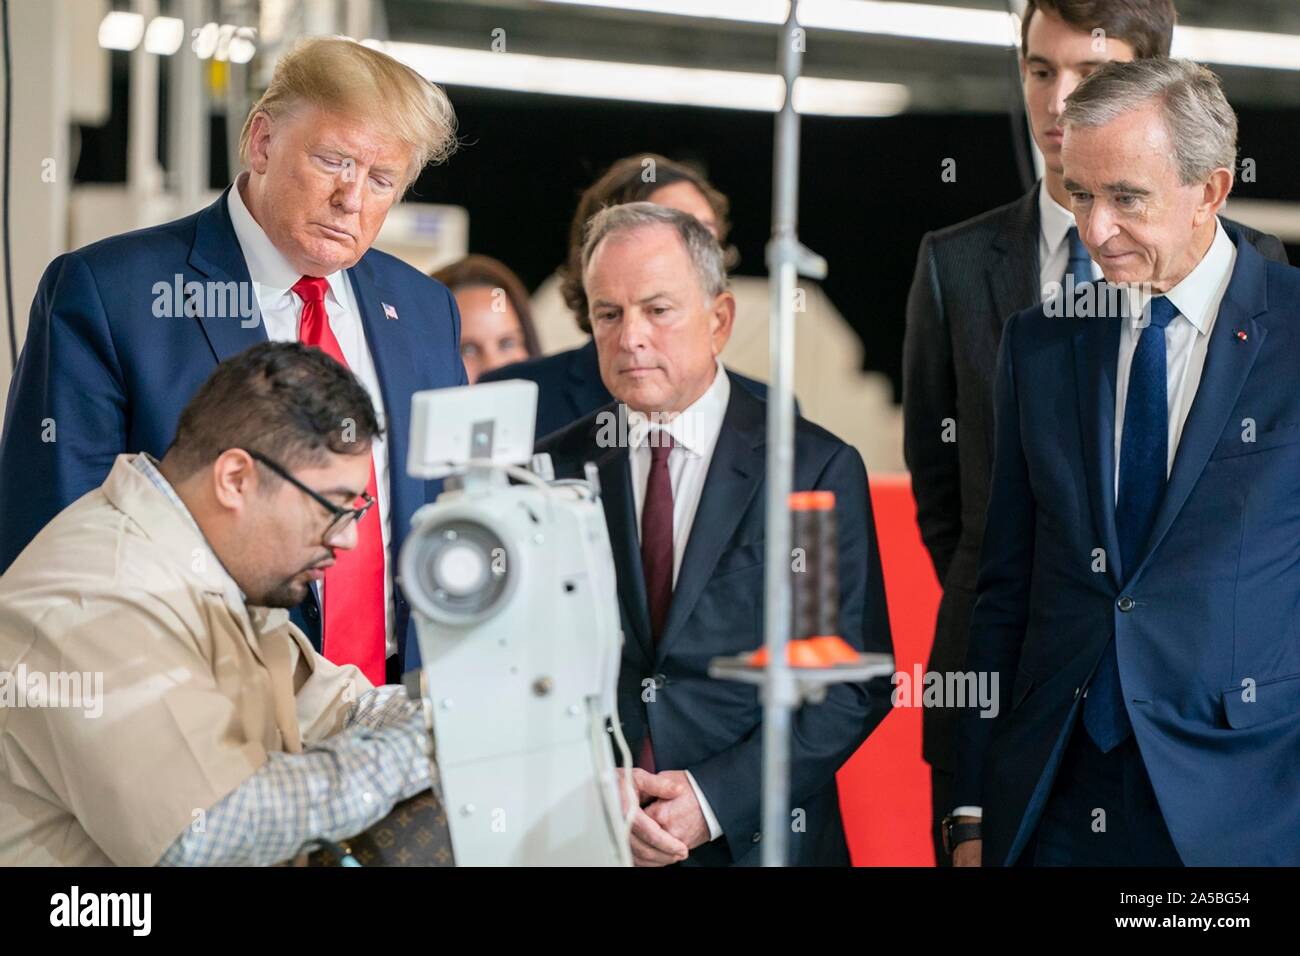 U.S President Donald Trump tours the newly opened Louis Vuitton